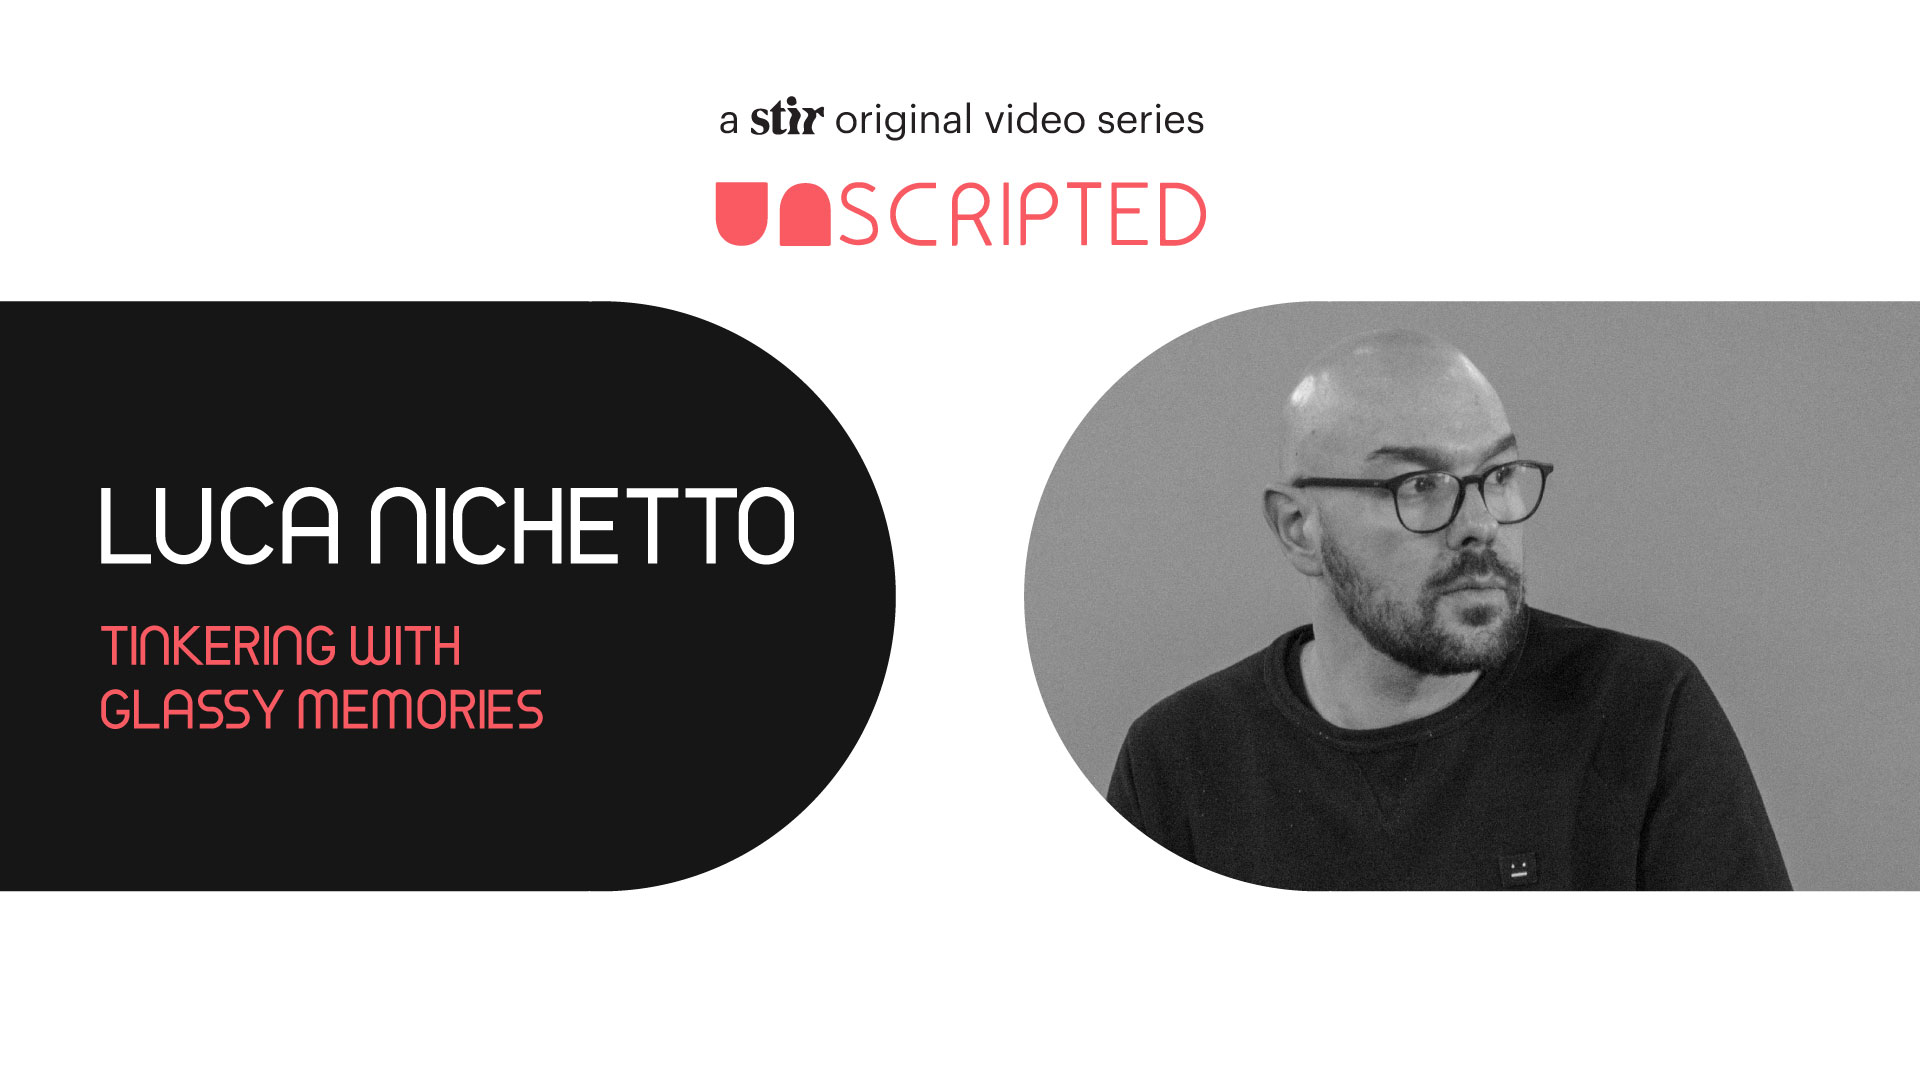 Design Voices podcast by Salone del Mobile x STIR brings creatives in engaging dialogues